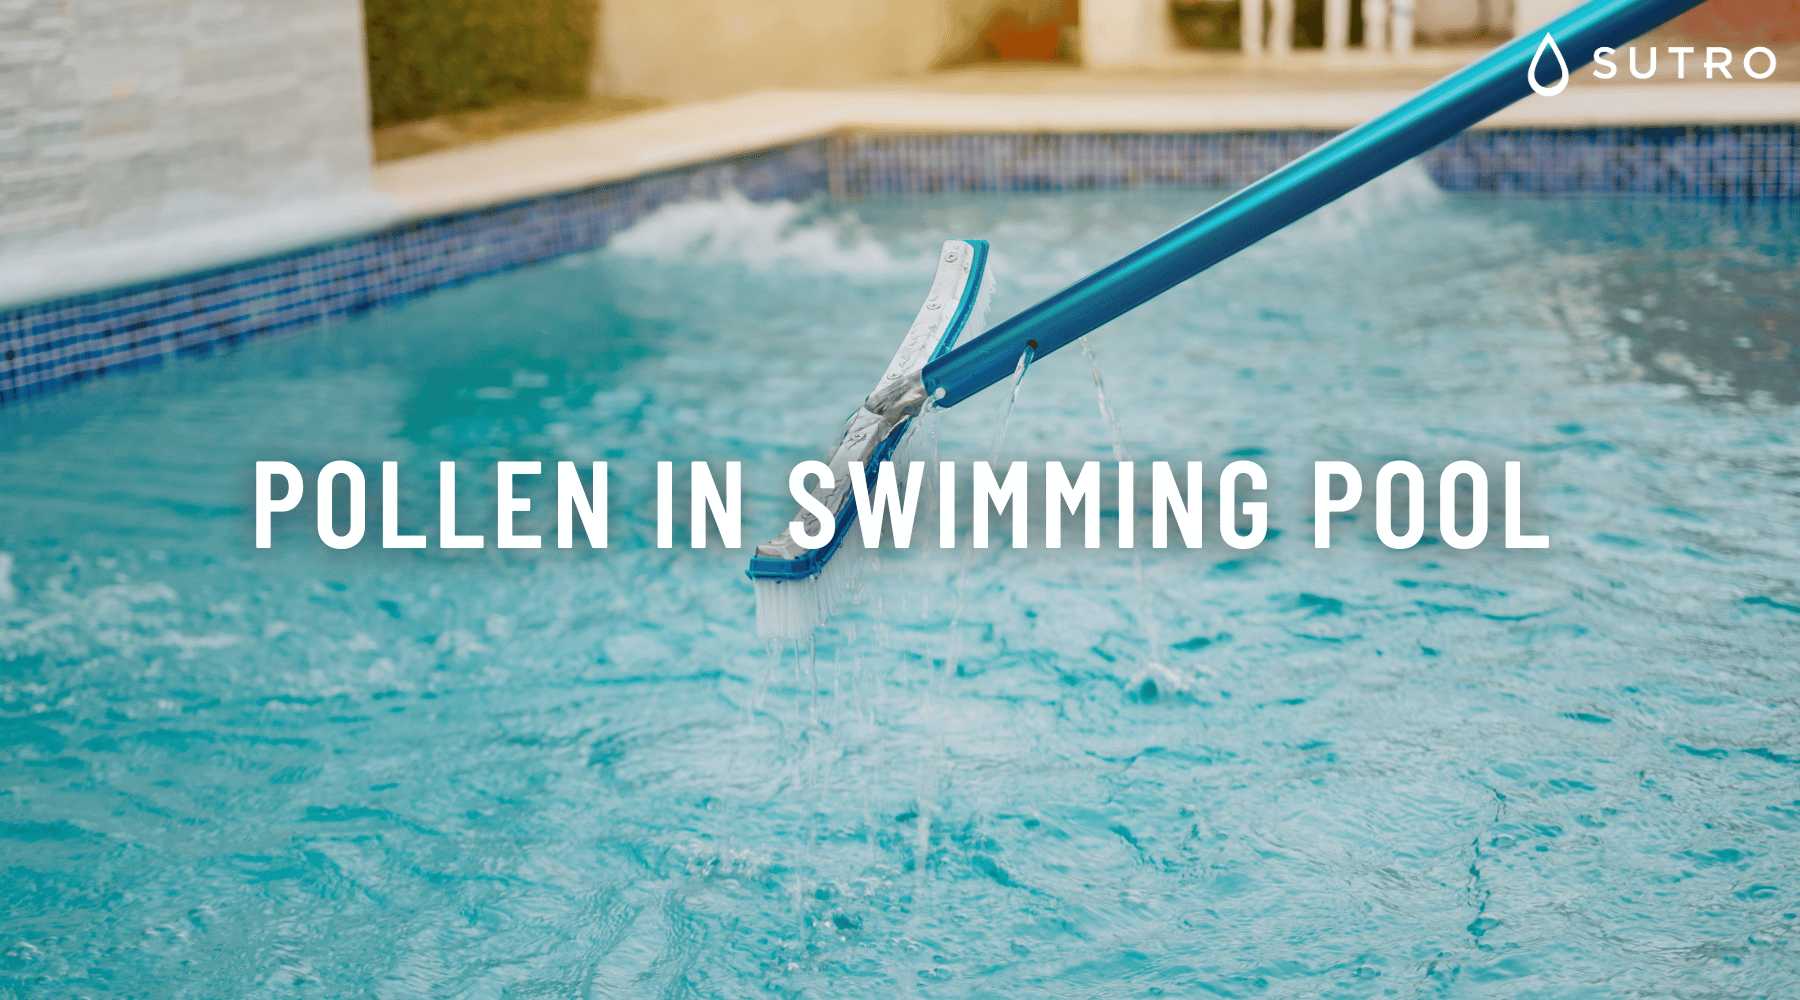 Pollen in Swimming pool / Why should you remove them and why – Sutro, Inc